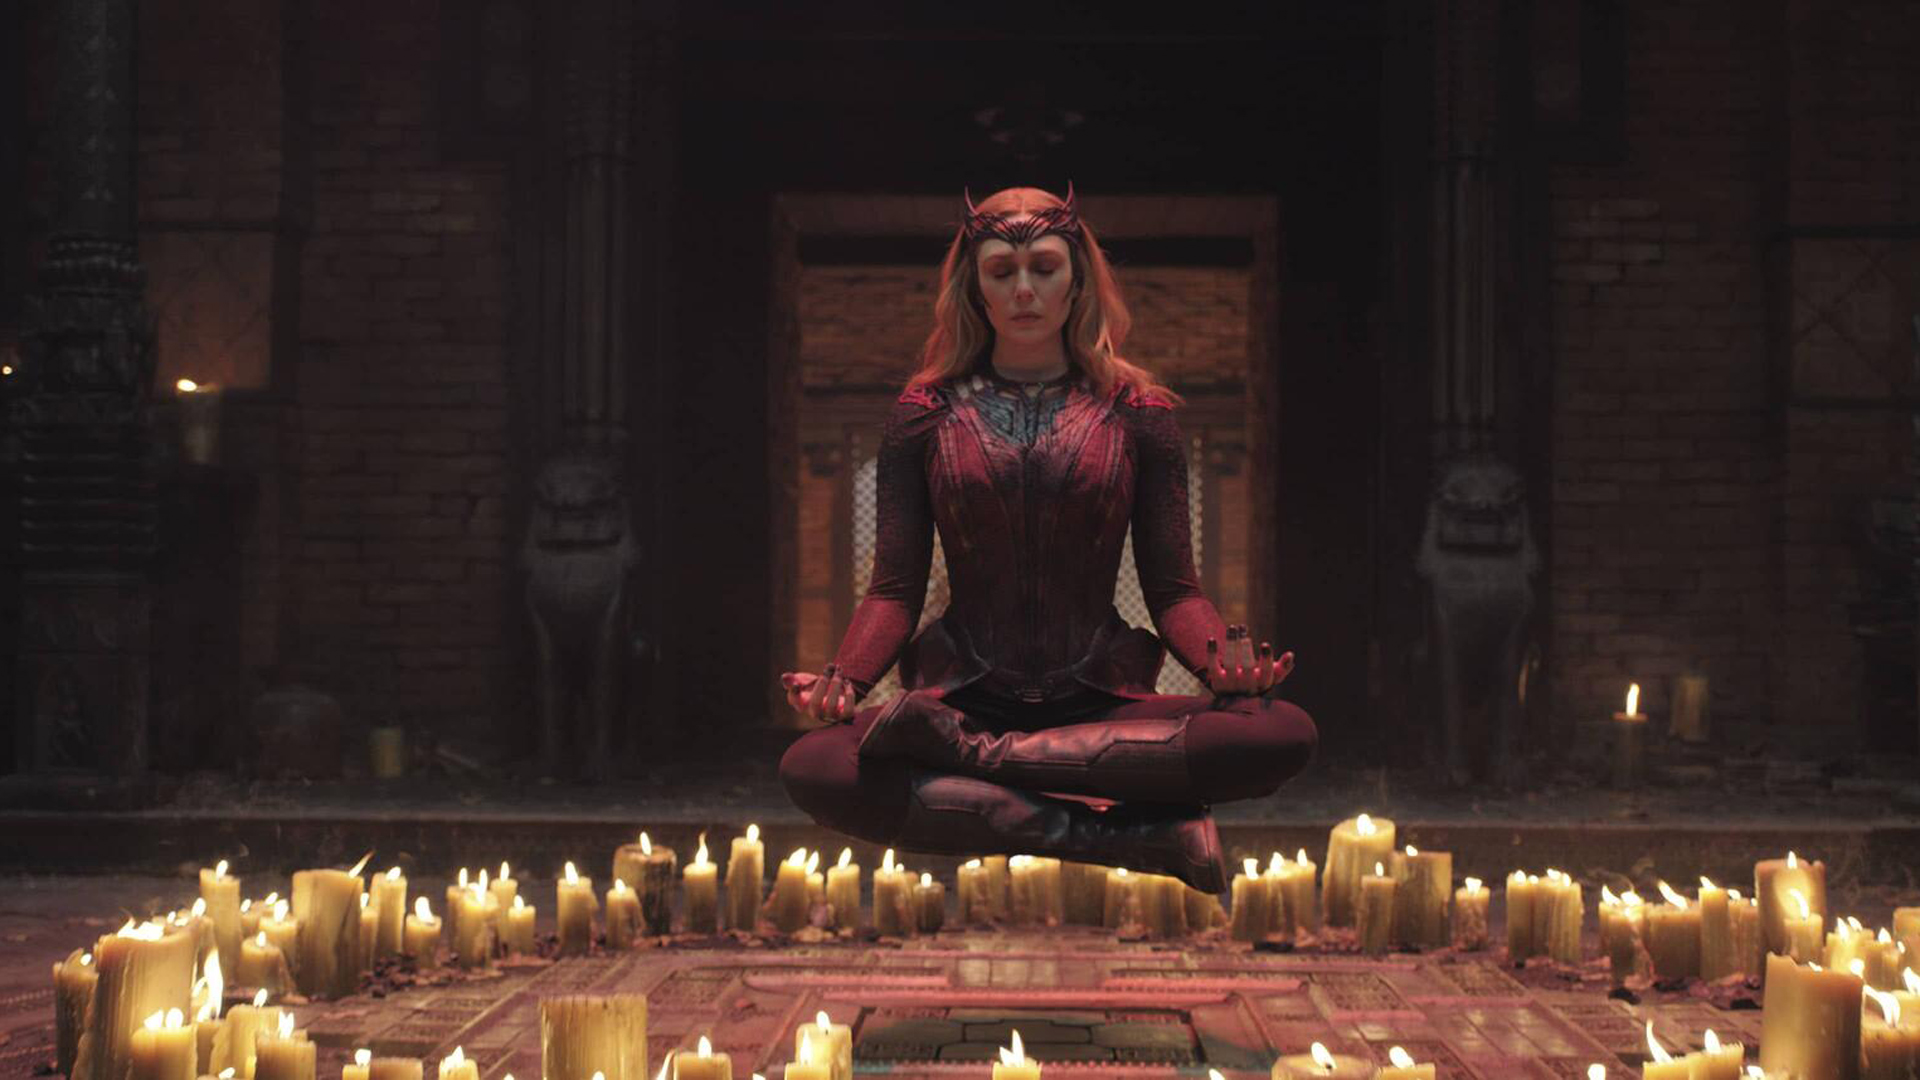 Wanda Maximoff leads a magical seance in Doctor Strange in the Multiverse of Madness